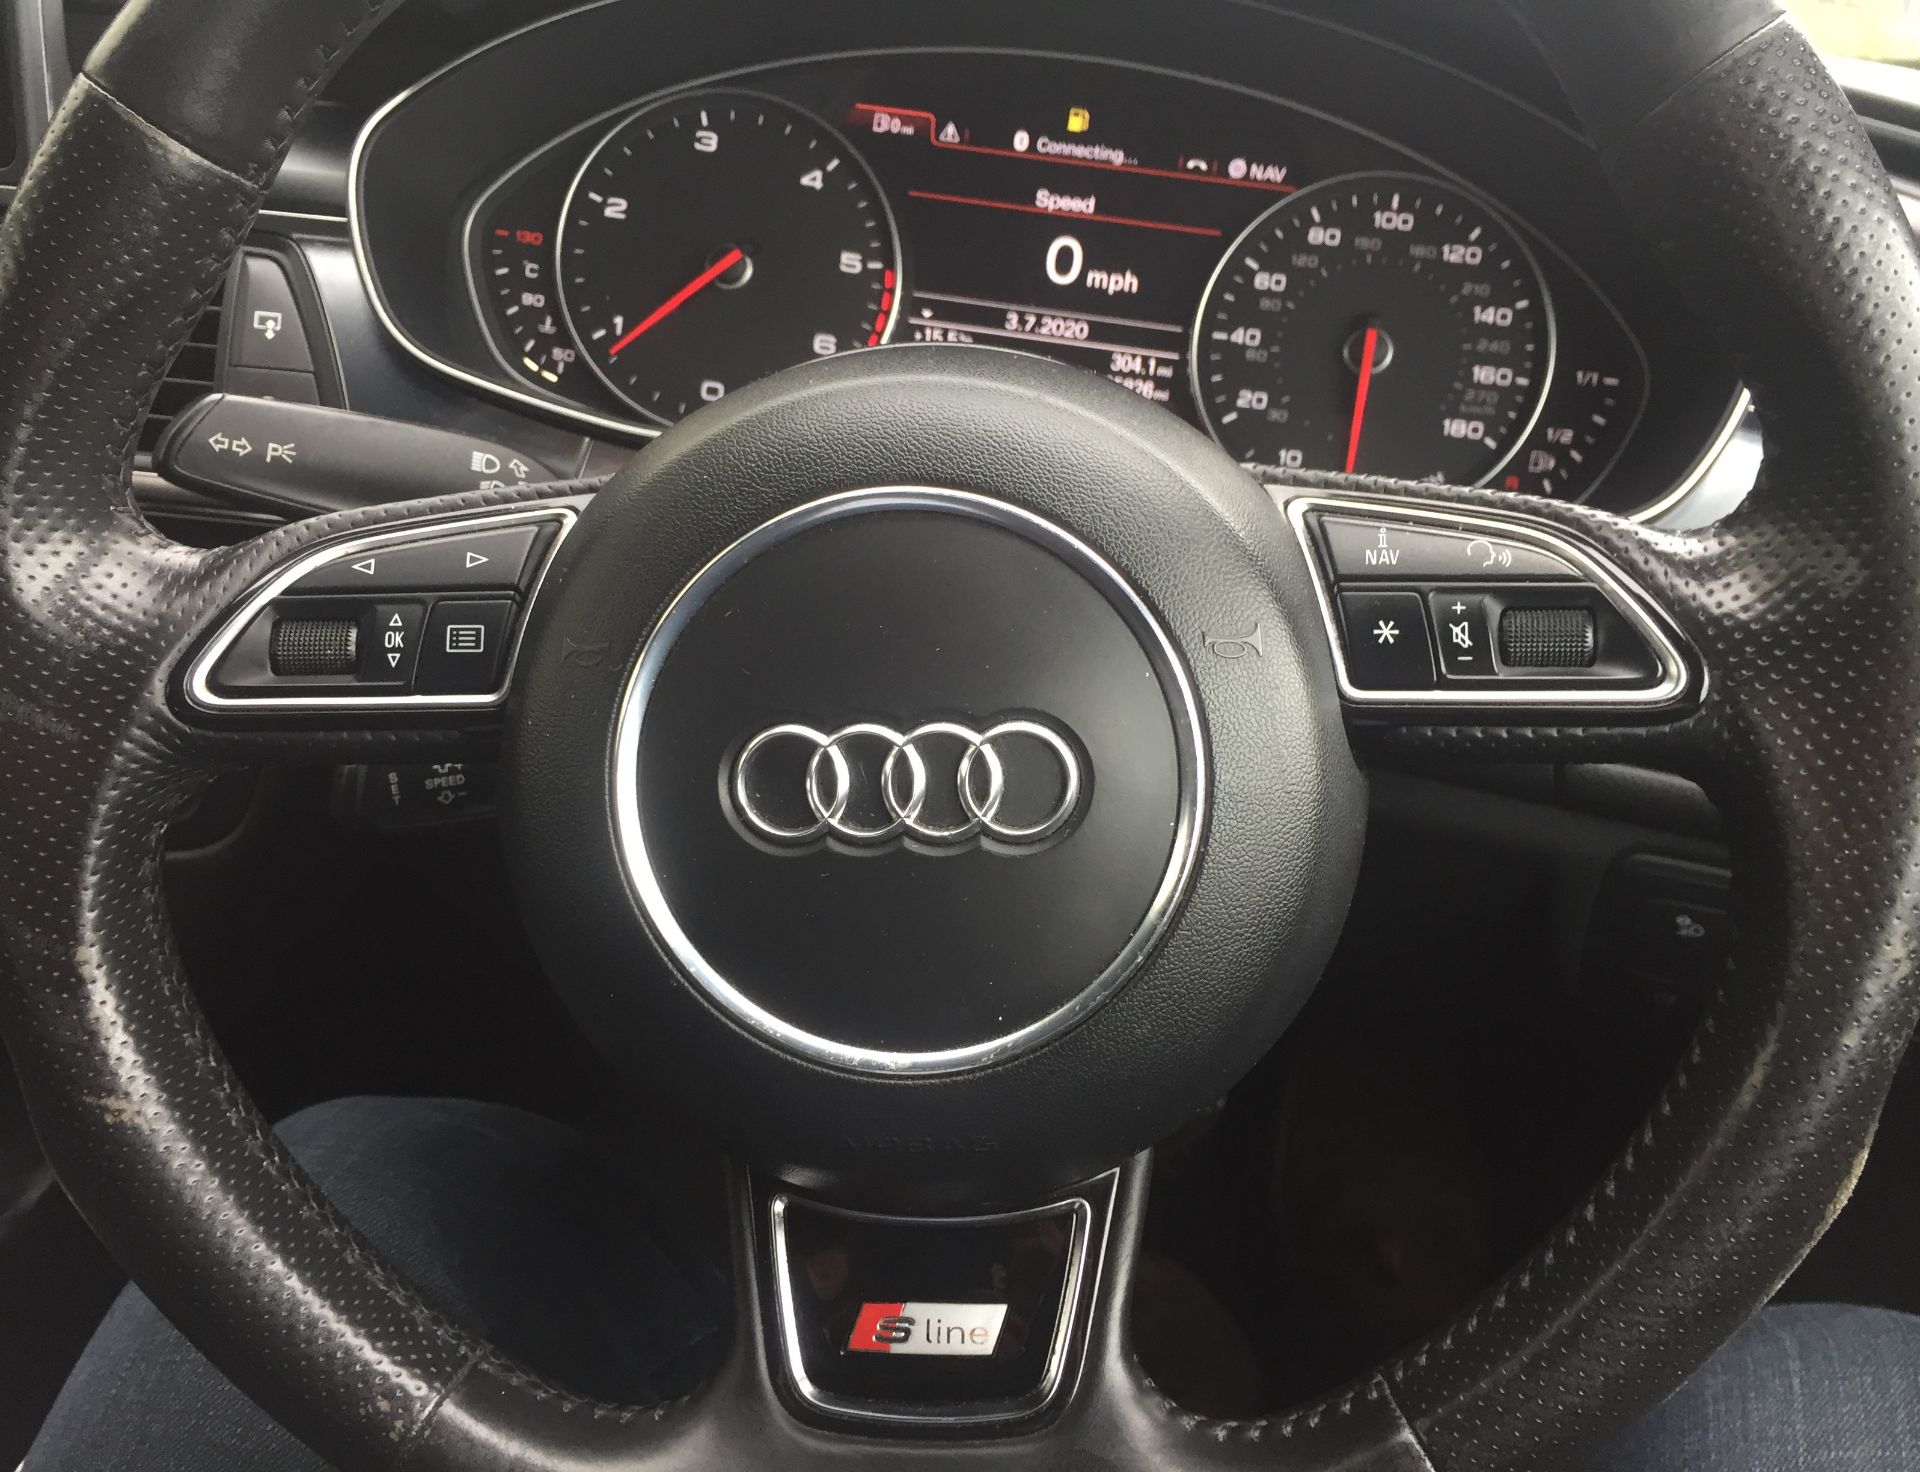 2013 Audi A6 2.0 Tdi S Line Black Edition 4 Dr Saloon - CL505 - NO VAT ON THE HAMMER - Location: Cor - Image 18 of 20